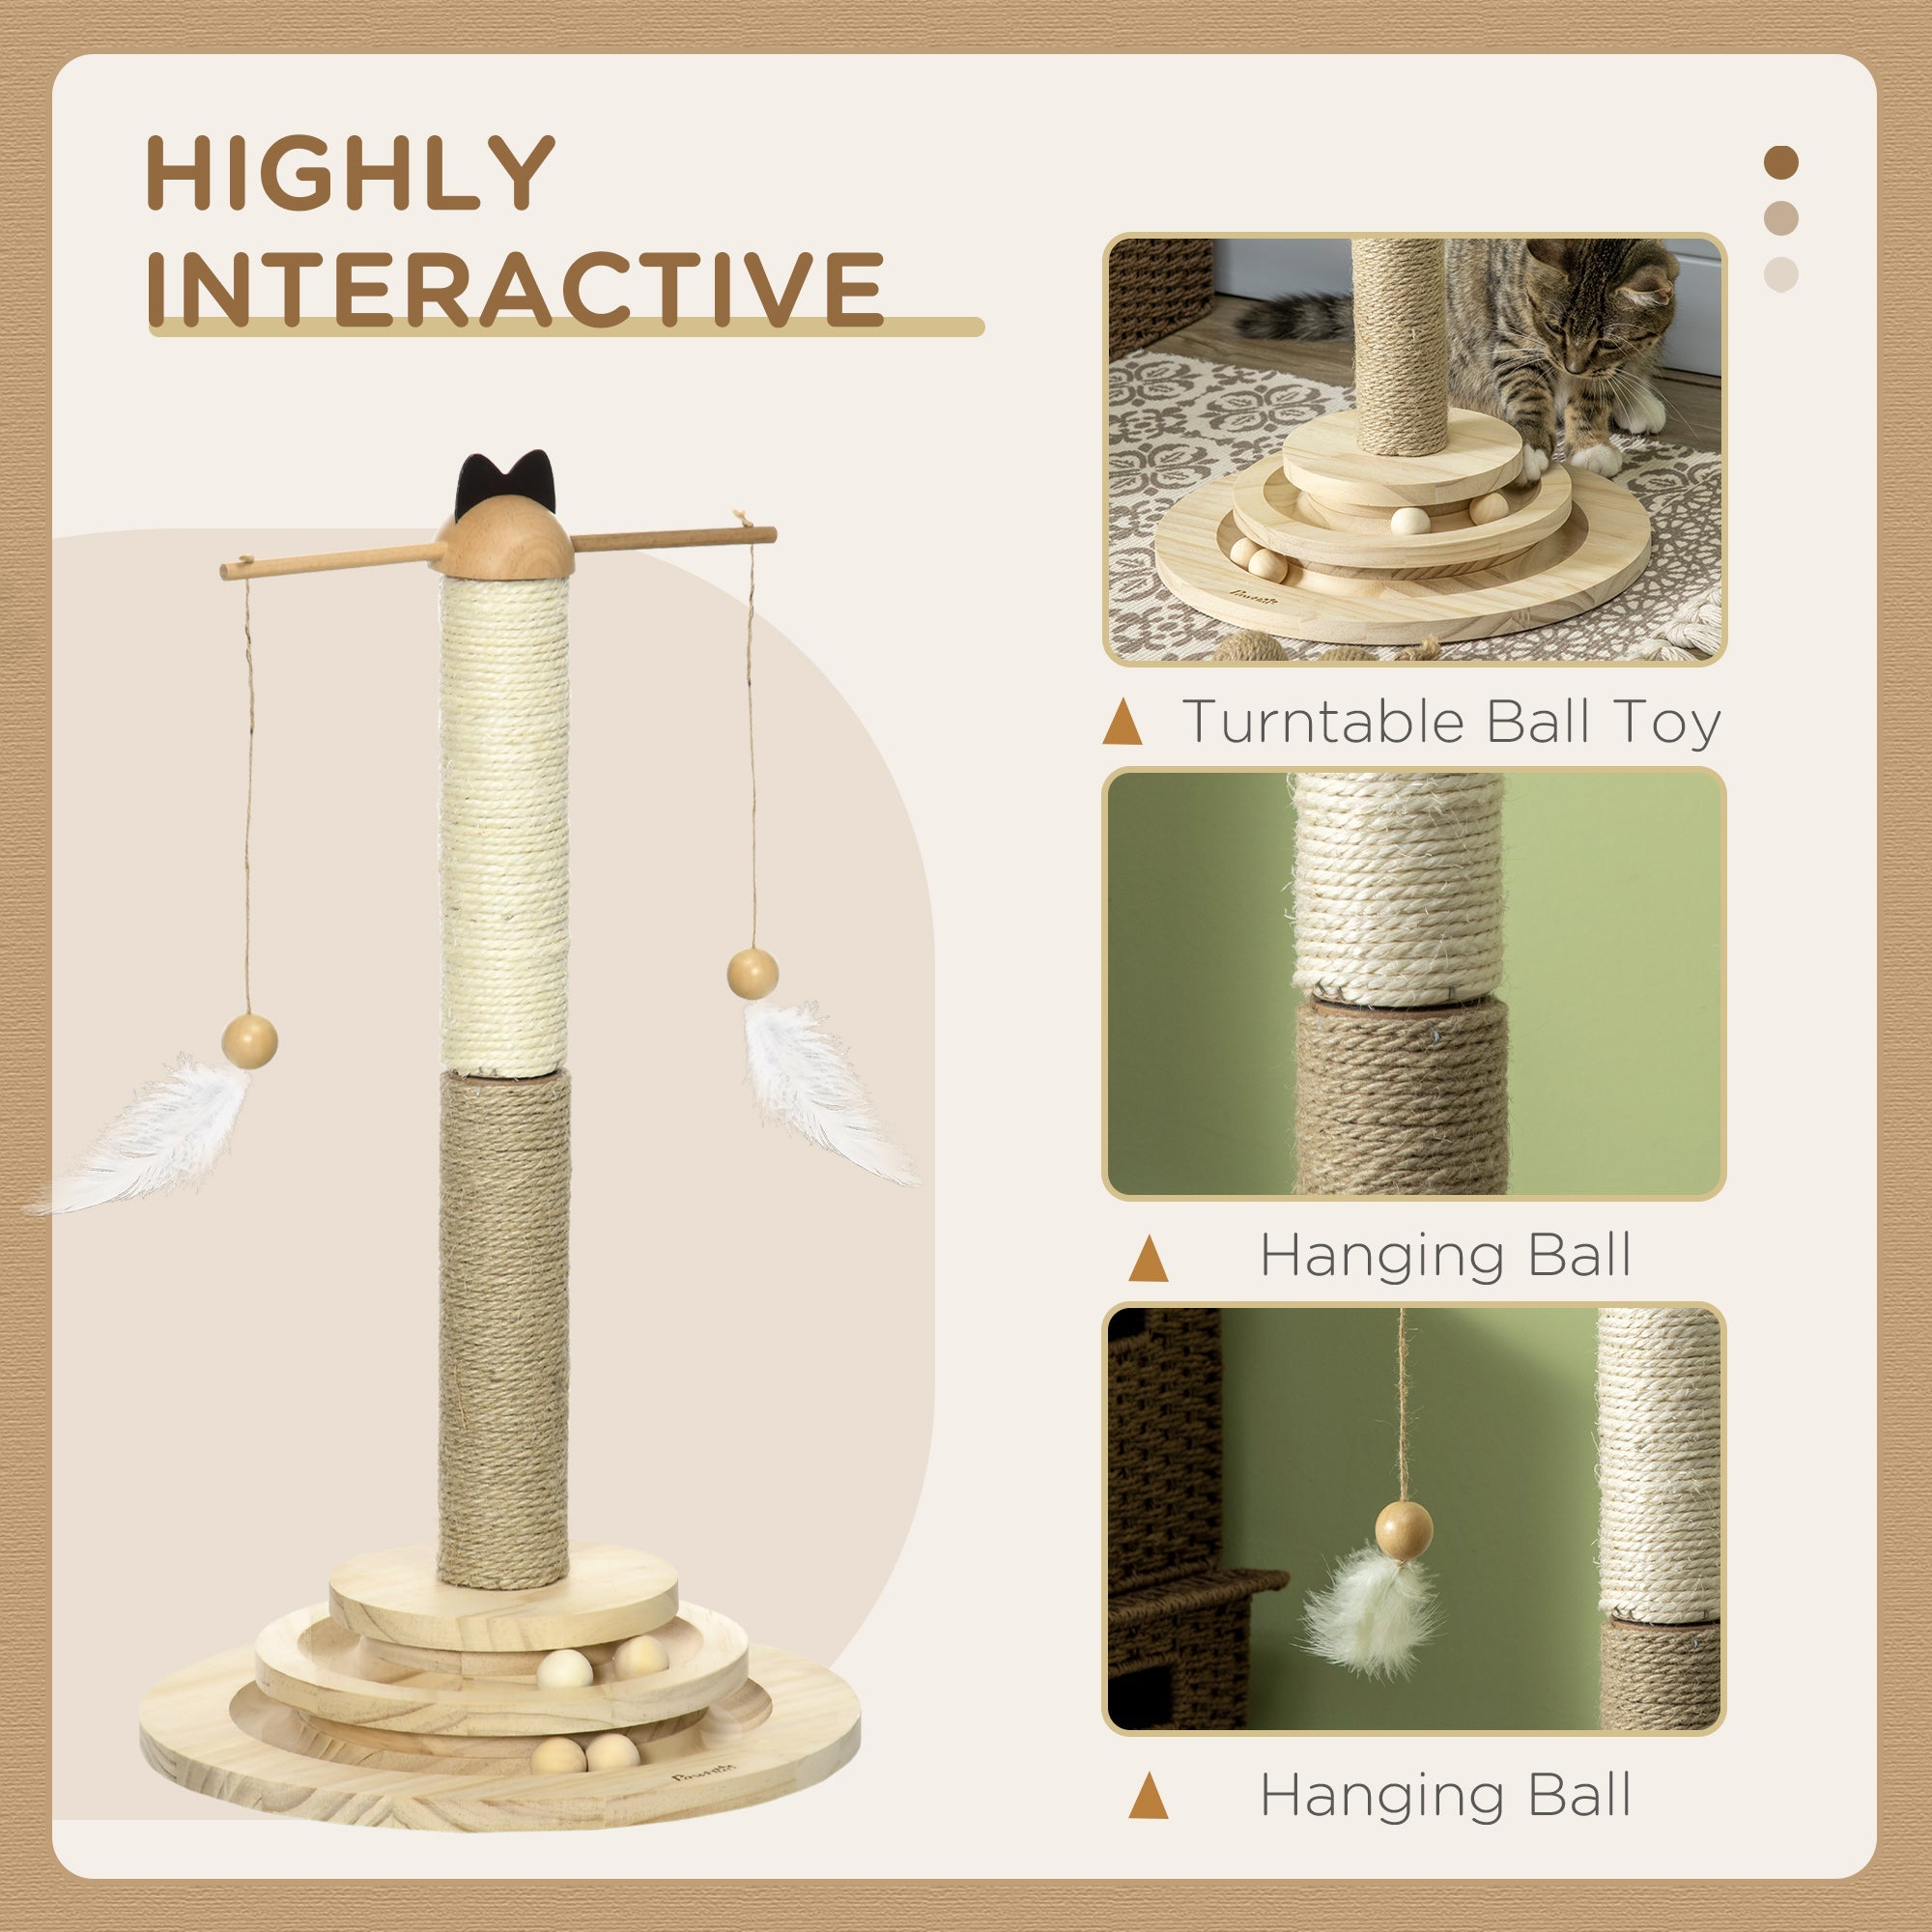 56cm Cat Tree, Kitty Activity Center with Turntable Interactive Ball Toy, Cat Tower with Jute & Sisal Scratching Post, Natural-4